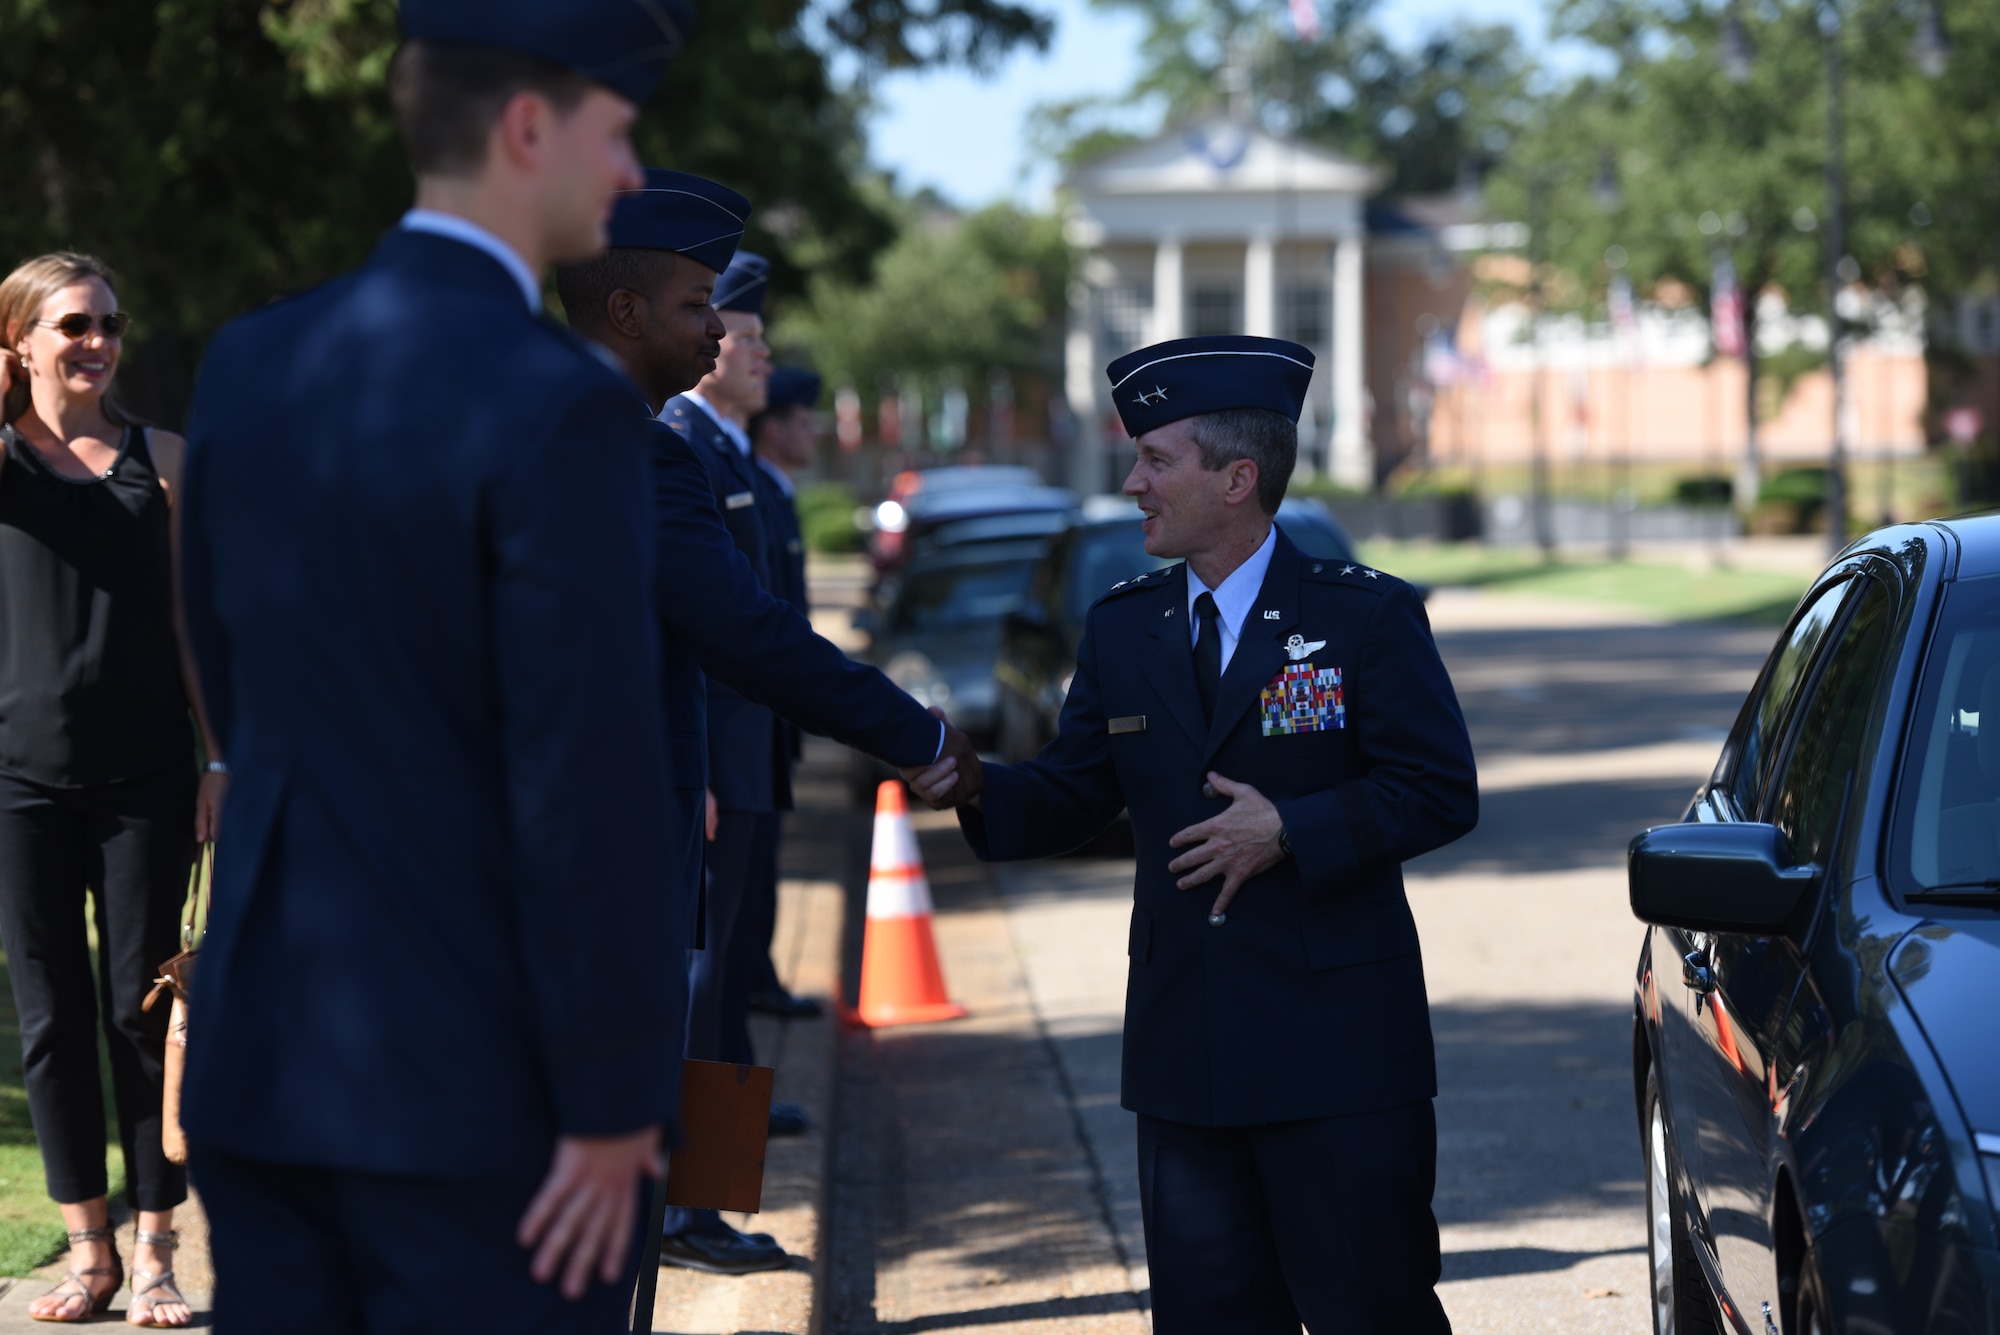 Maj. Gen. Michael D. Rothstein, commander of the Curtis E. LeMay Center and vice commander of Air University at Maxwell Air Force Base, Alabama, greets students of Specialized Undergraduate Pilot Training Classes 18-14/15 at their graduation Sept. 7, 2018, on Columbus Air Force Base, Mississippi. Twenty-five officers completed 53 weeks of training in order to become new, highly trained pilots. (U.S. Air Force photo by Airman 1st Class Beaux Hebert)